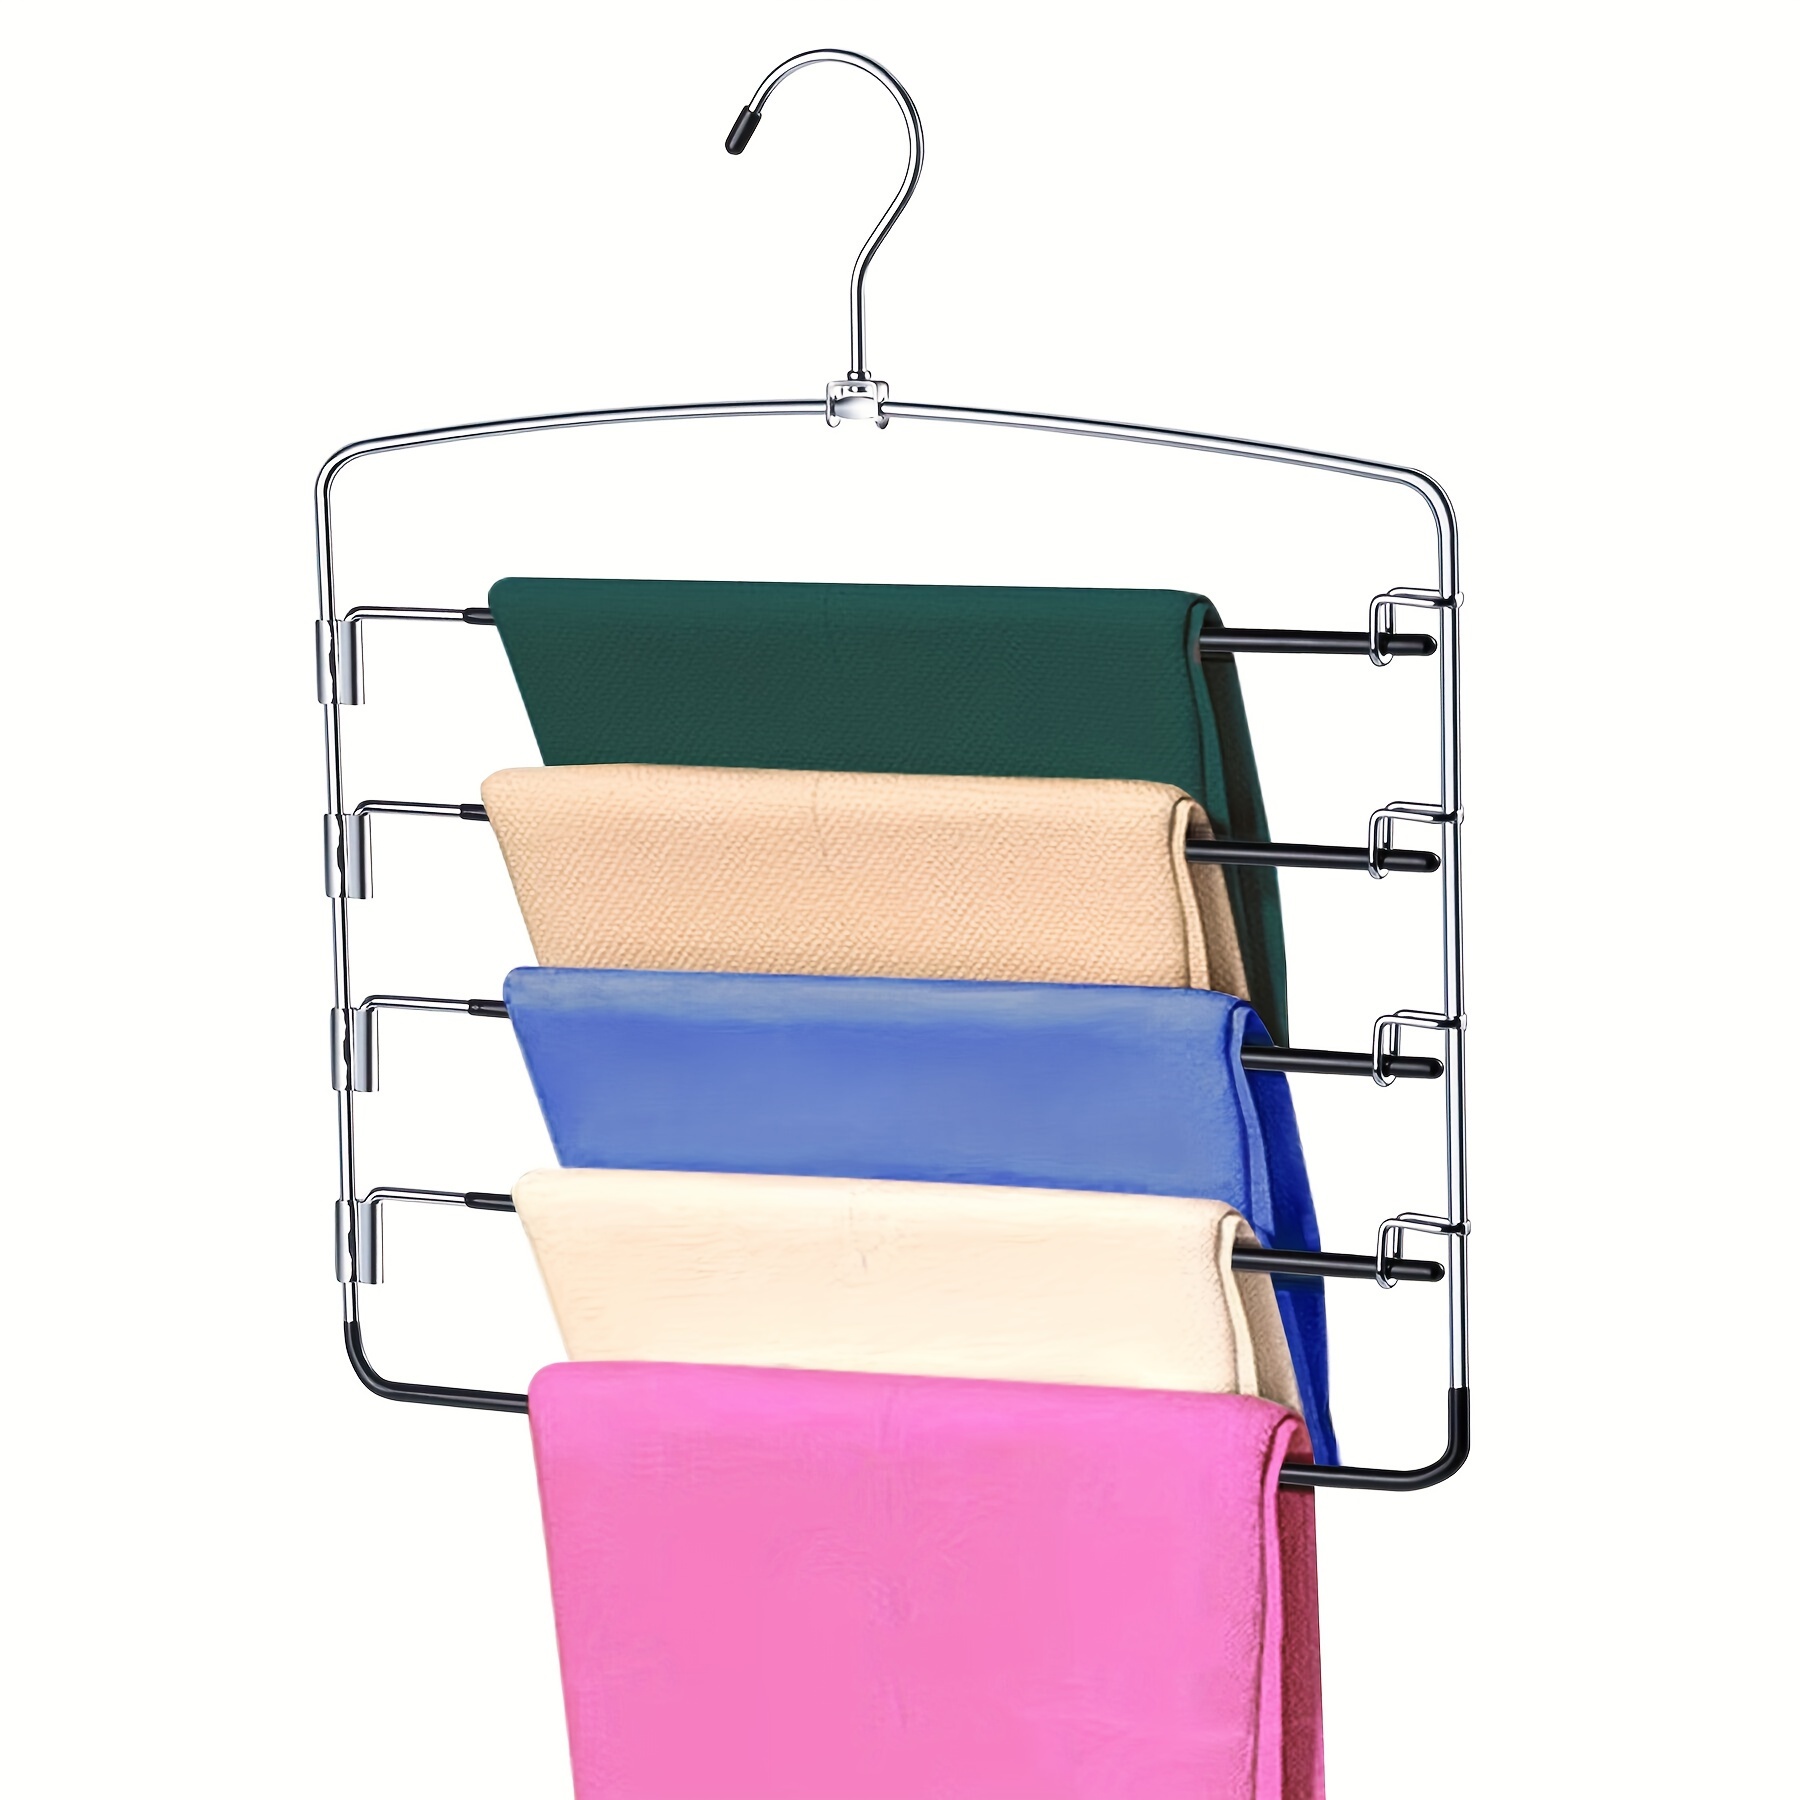 

1pc Multi-layer Non-slip Metal Belt Hanger, Durable Clothes Rack For Ties, Pants, Scarves, Jeans, Trouser, Household Space Saving Organizer For Closet, Wardrobe, Home, Dorm